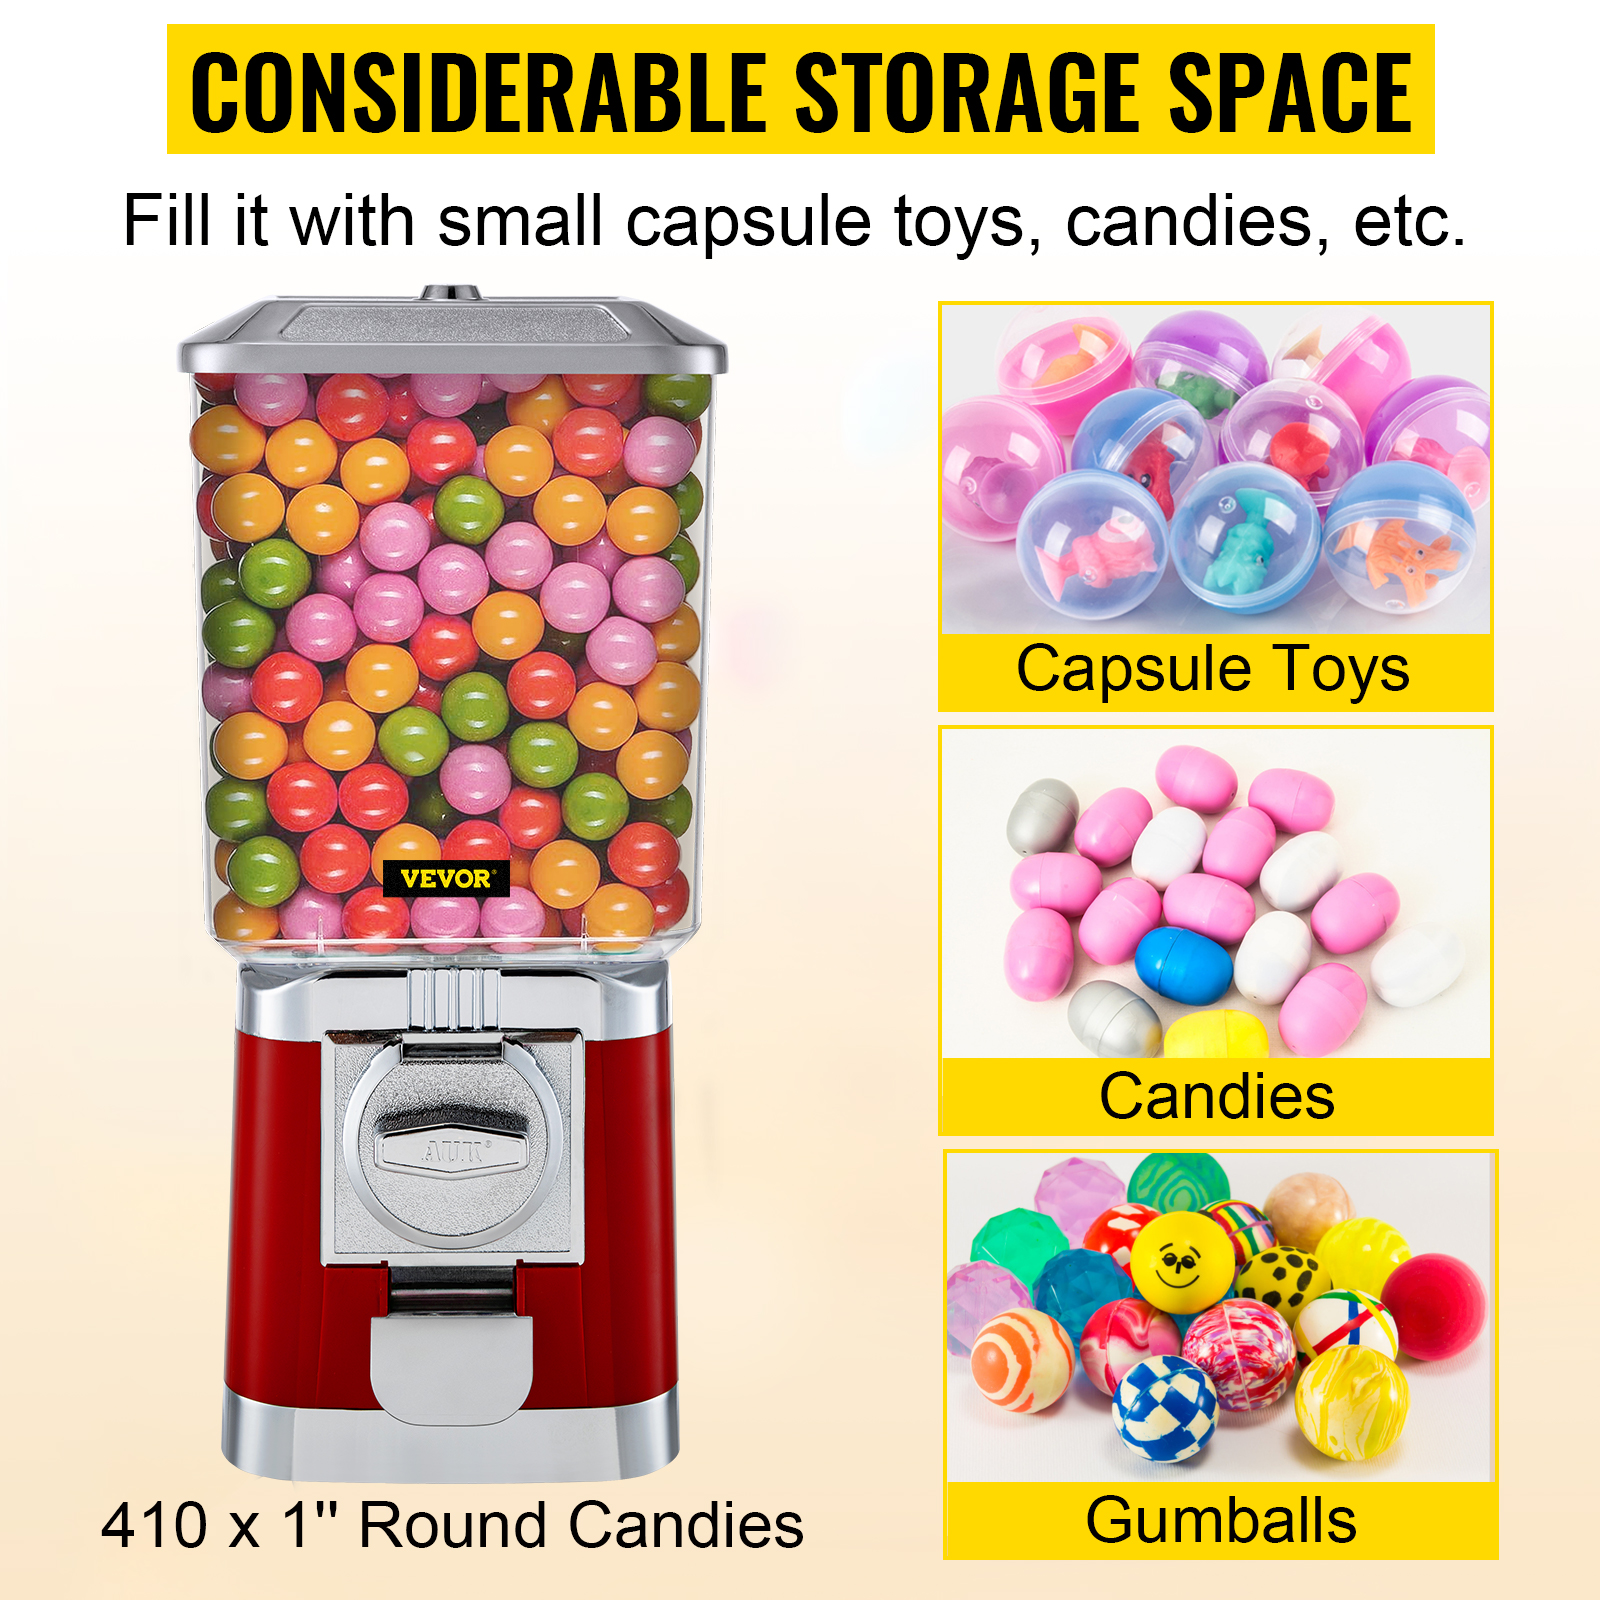 Christmas and Kiddie Parties VEVOR Vending Machine Perfect for Birthdays Classic Gumball Bank Mini Vending Machines Huge Load Capacity Candy Gumball Machine Gumball Dispenser Machine for Kids 